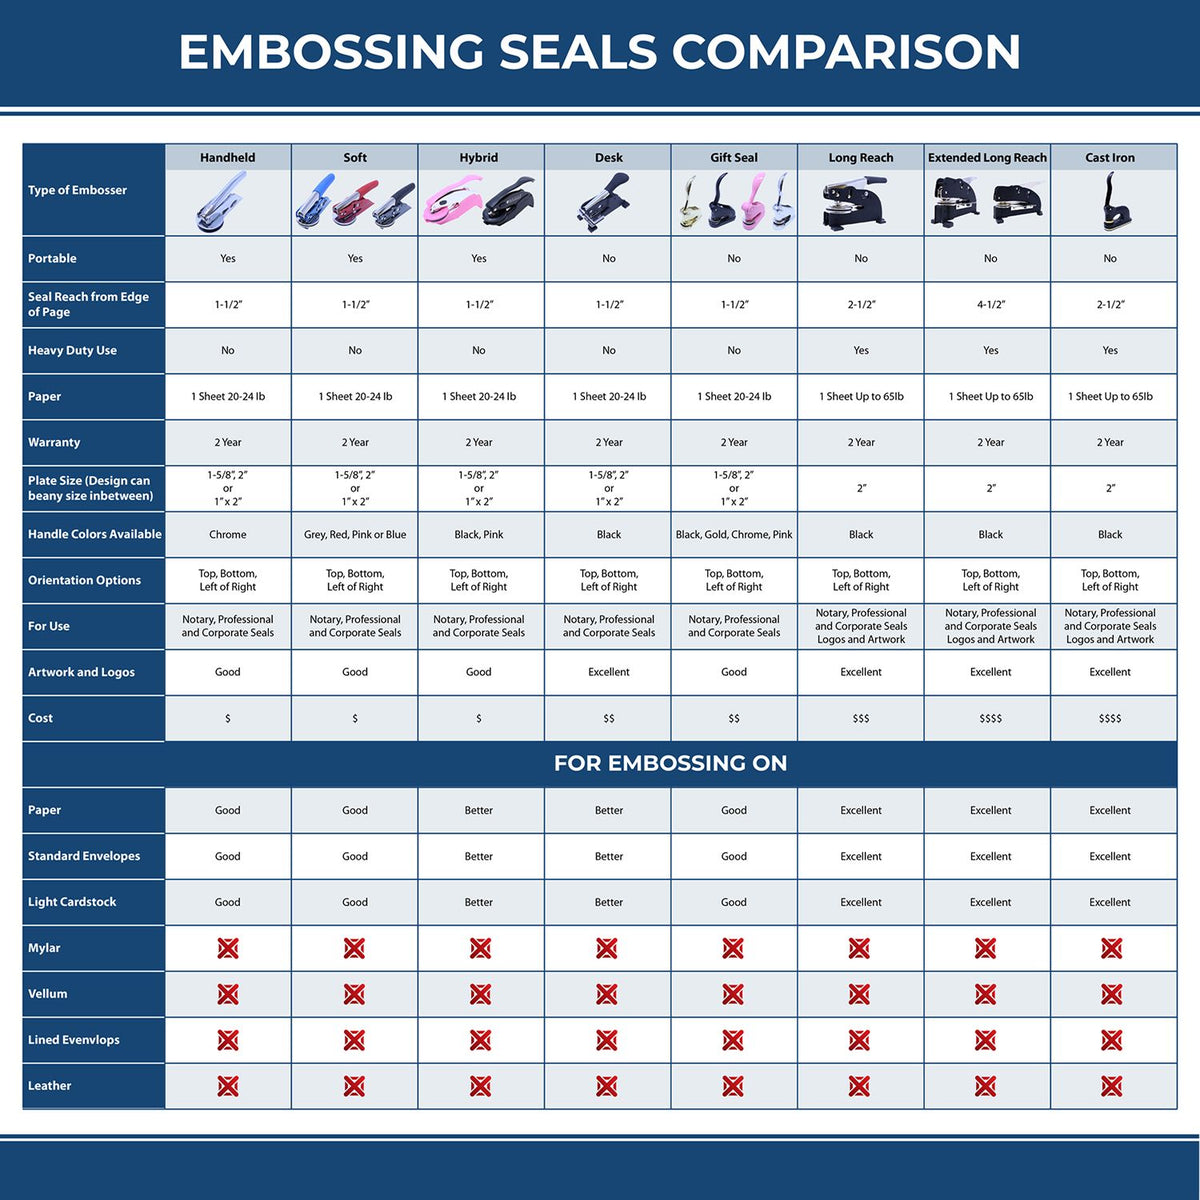 A comparison chart for the different types of mount models available for the Handheld Connecticut Professional Engineer Embosser.